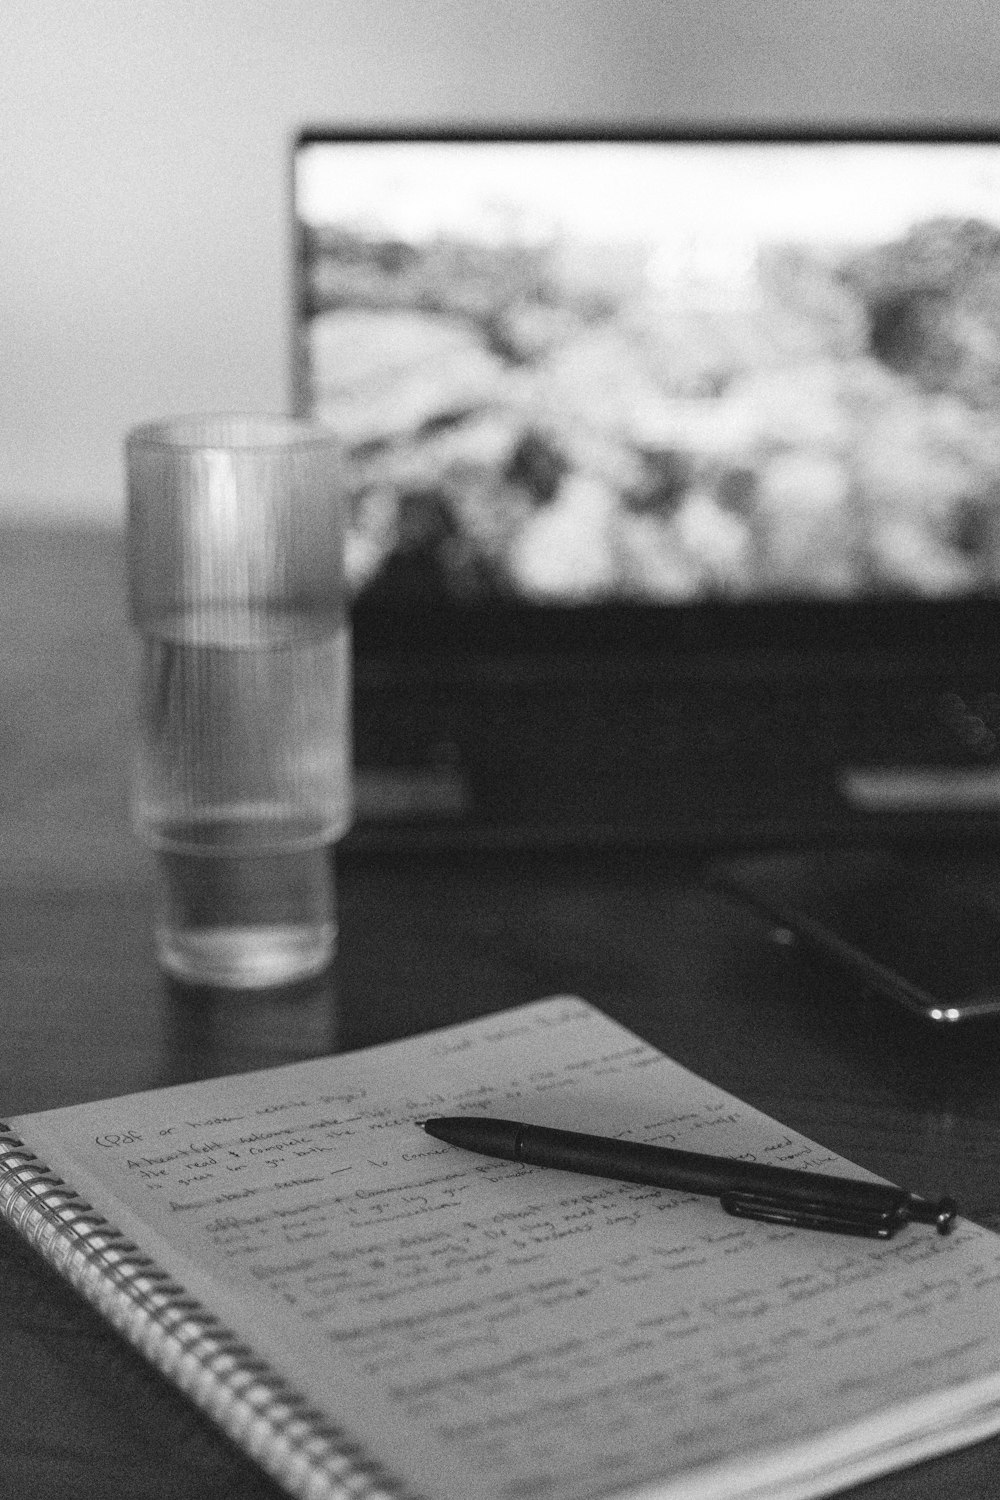 a notebook and a pen on a table with a television in the background